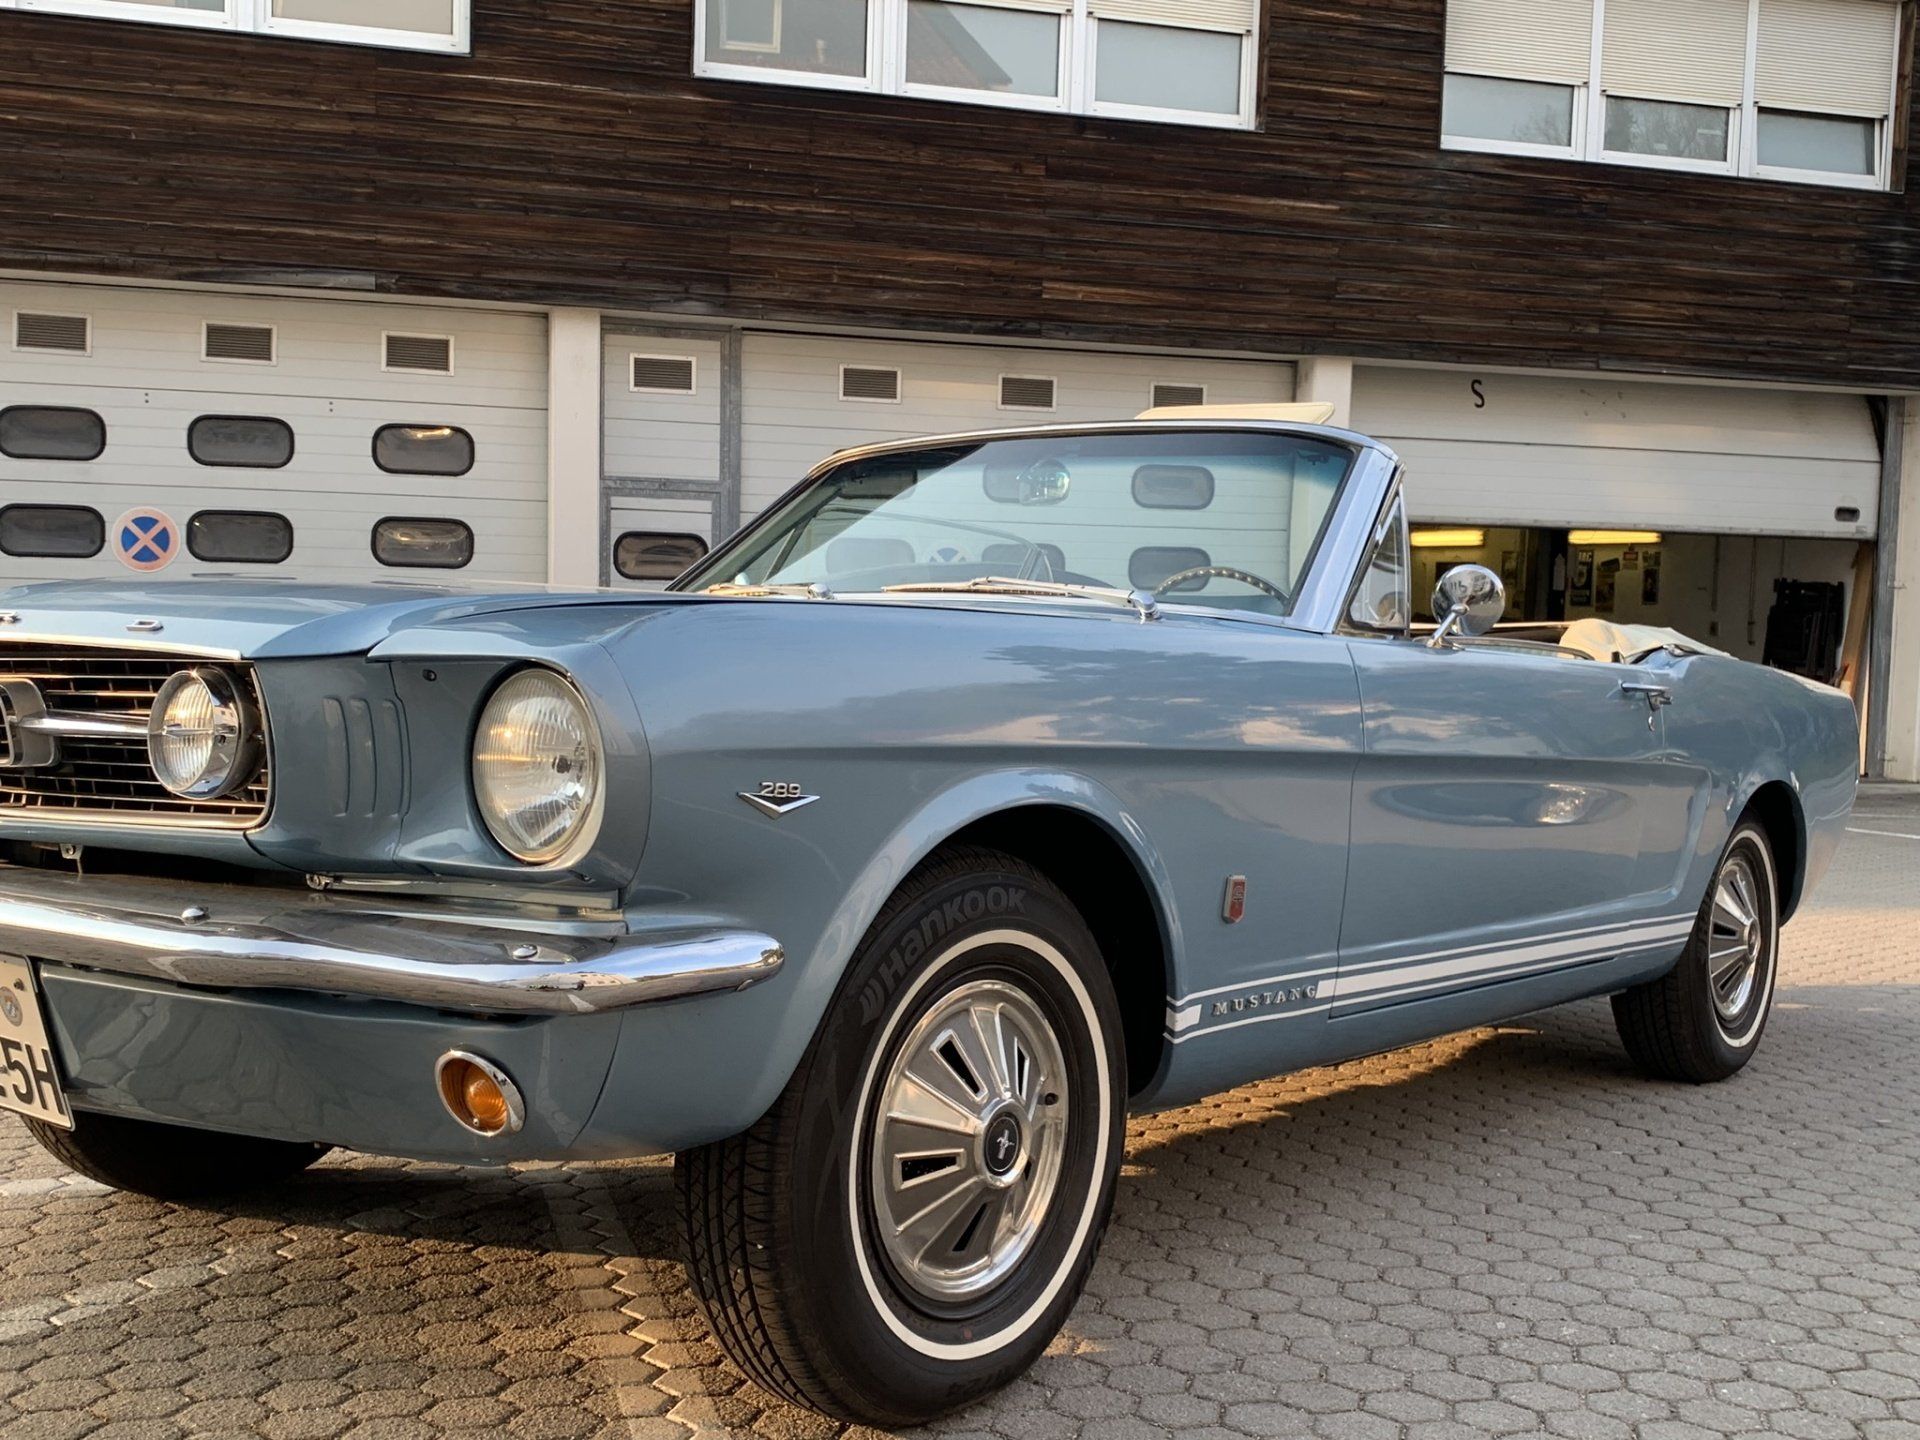 1966 Ford Mustang Cabrio V8 US car muscle car Oldtimer